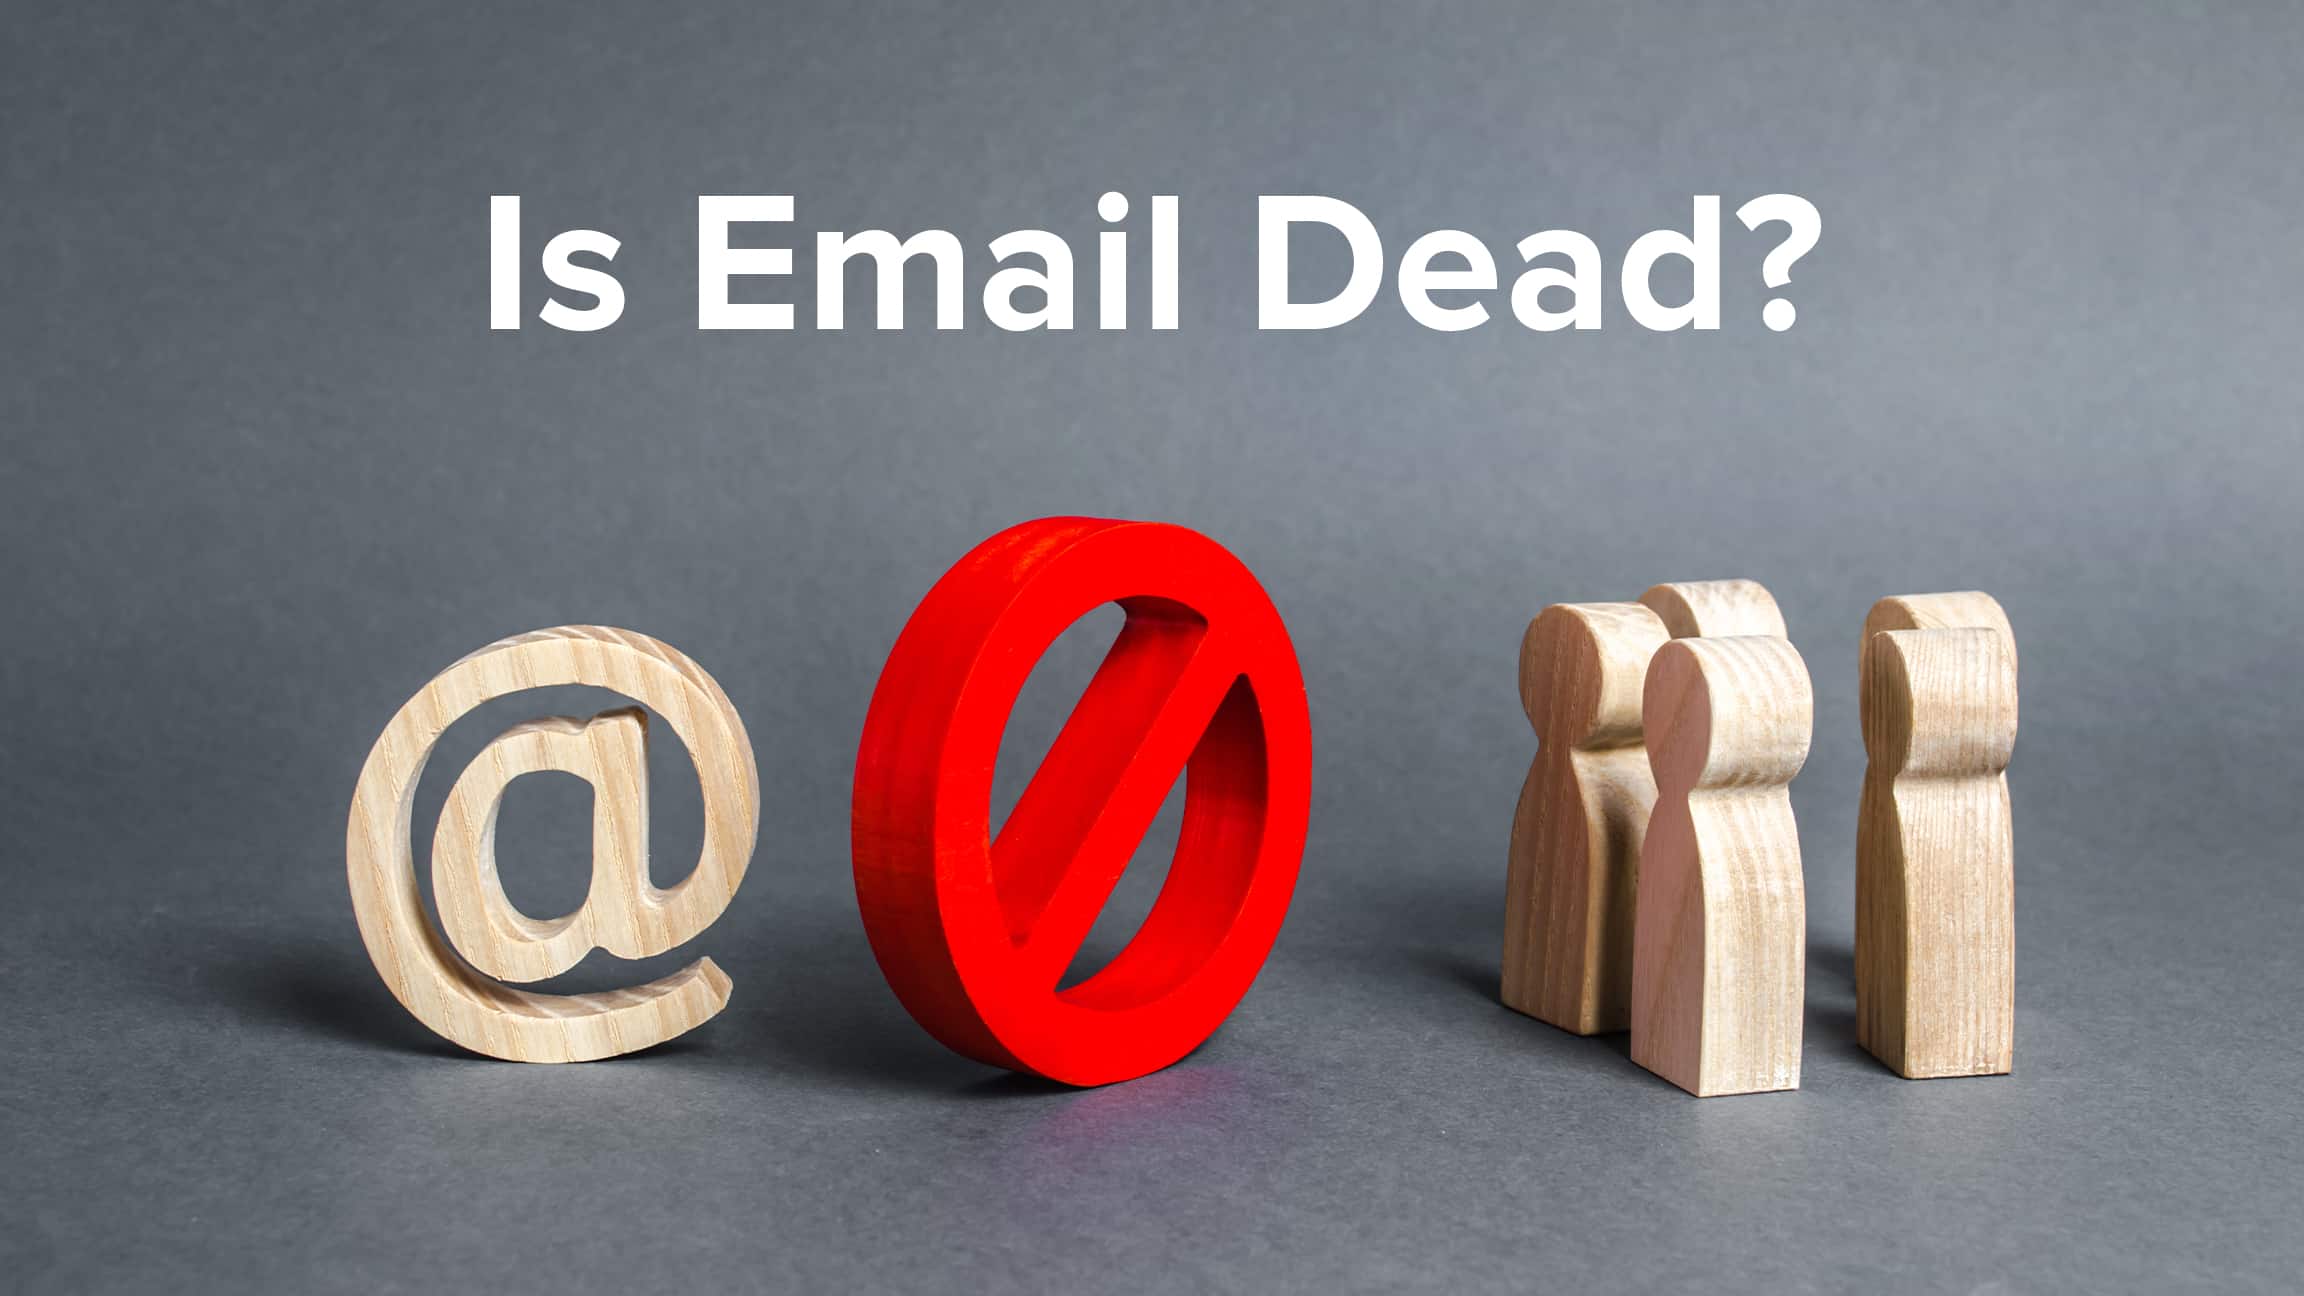 Should Companies Consider Banning Email?